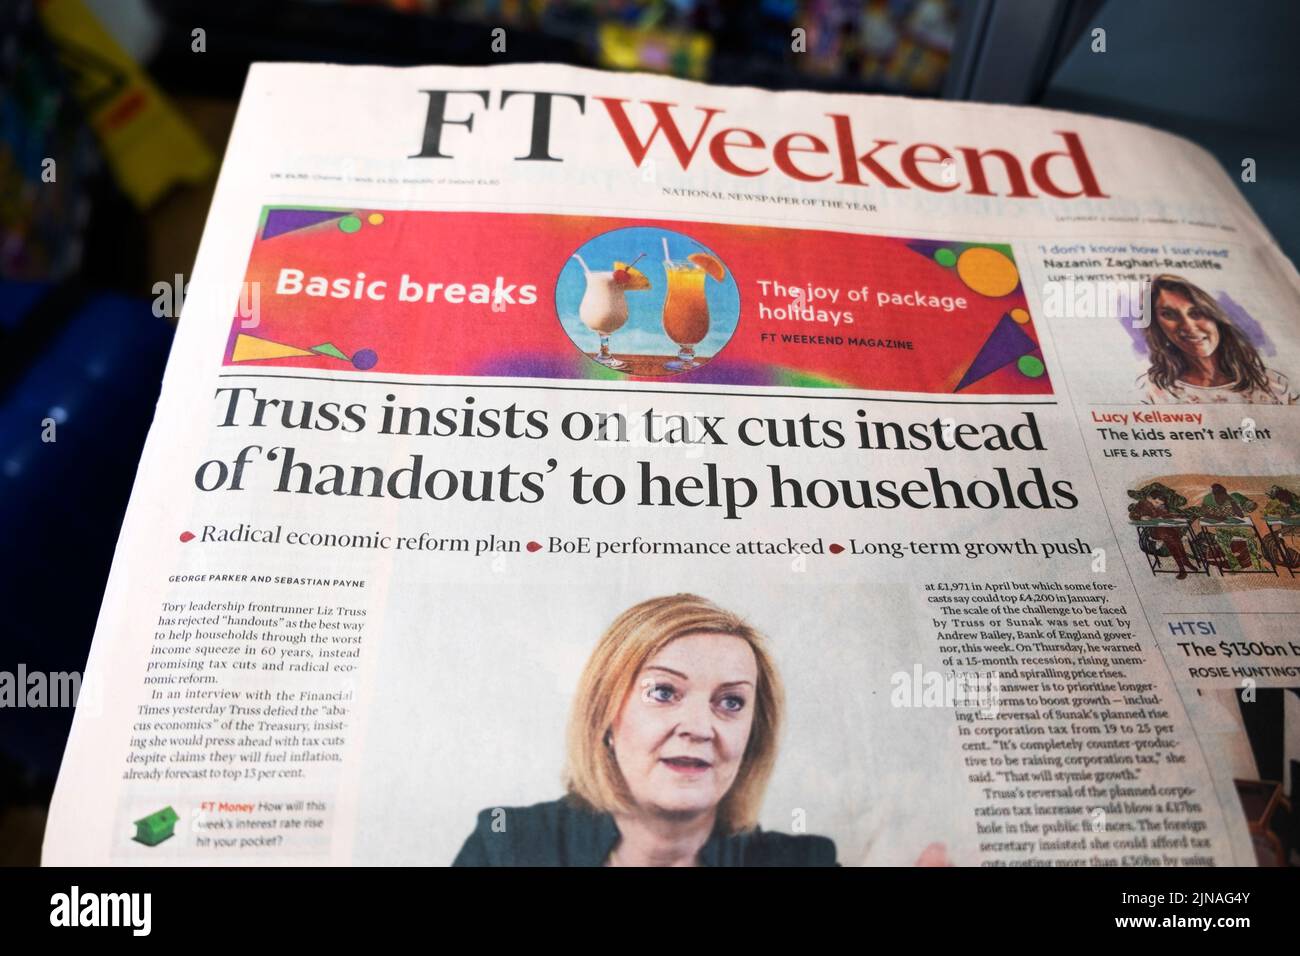 'Truss insists on tax cuts instead of 'handouts' to help households' FT Weekend Financial Times newspaper headline front page 29 July 2022 London UK Stock Photo